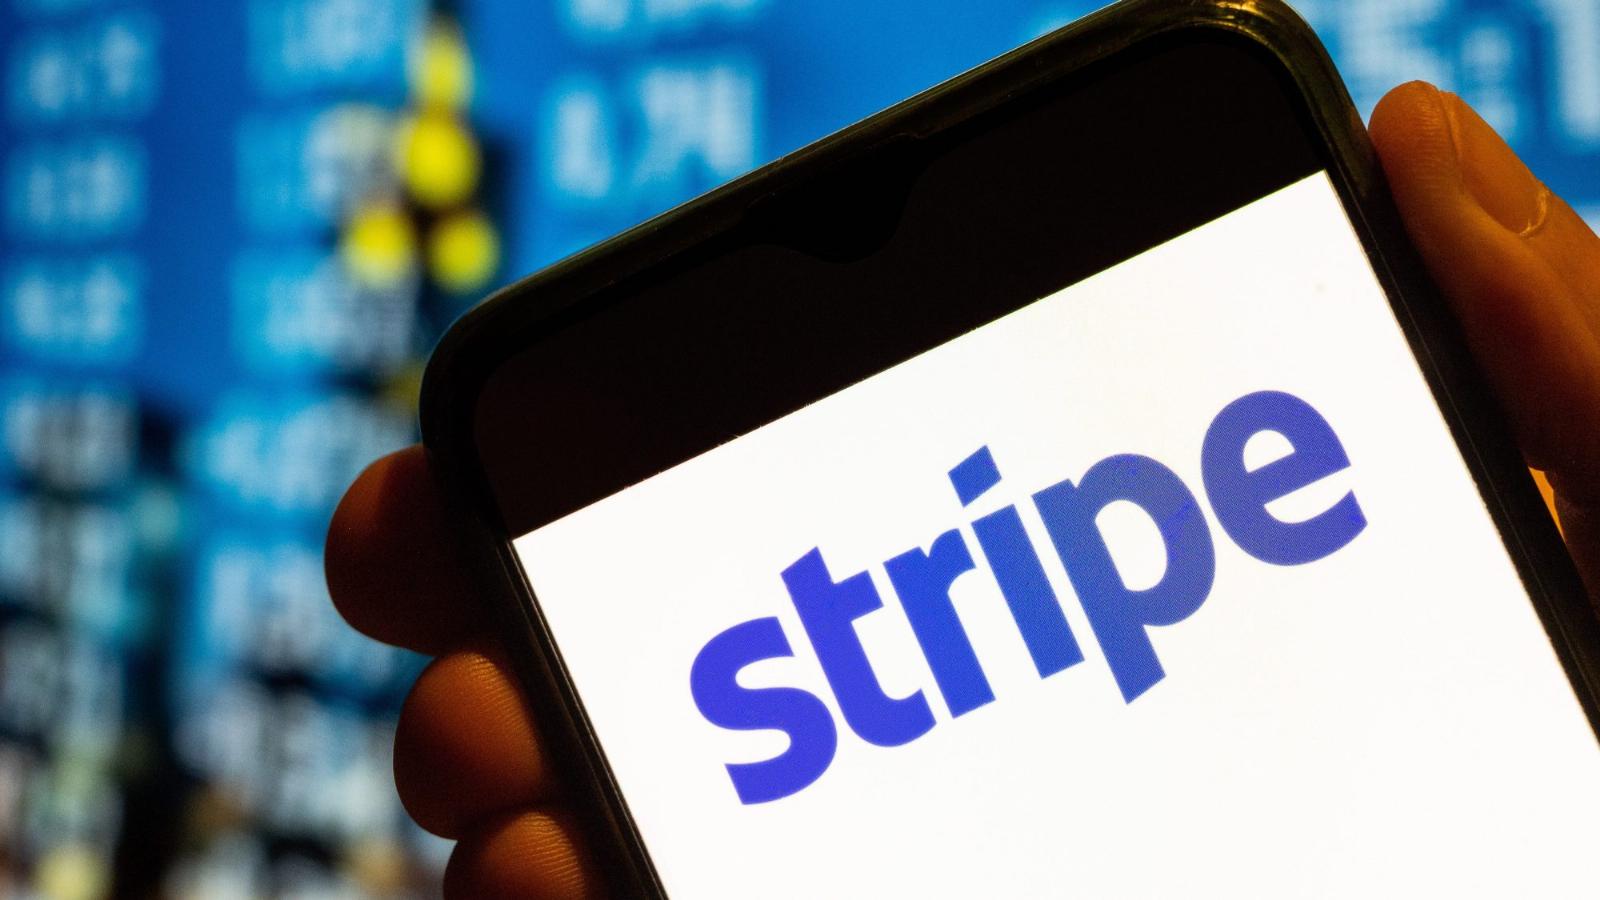 Stripe eyes an exit over next 12 months